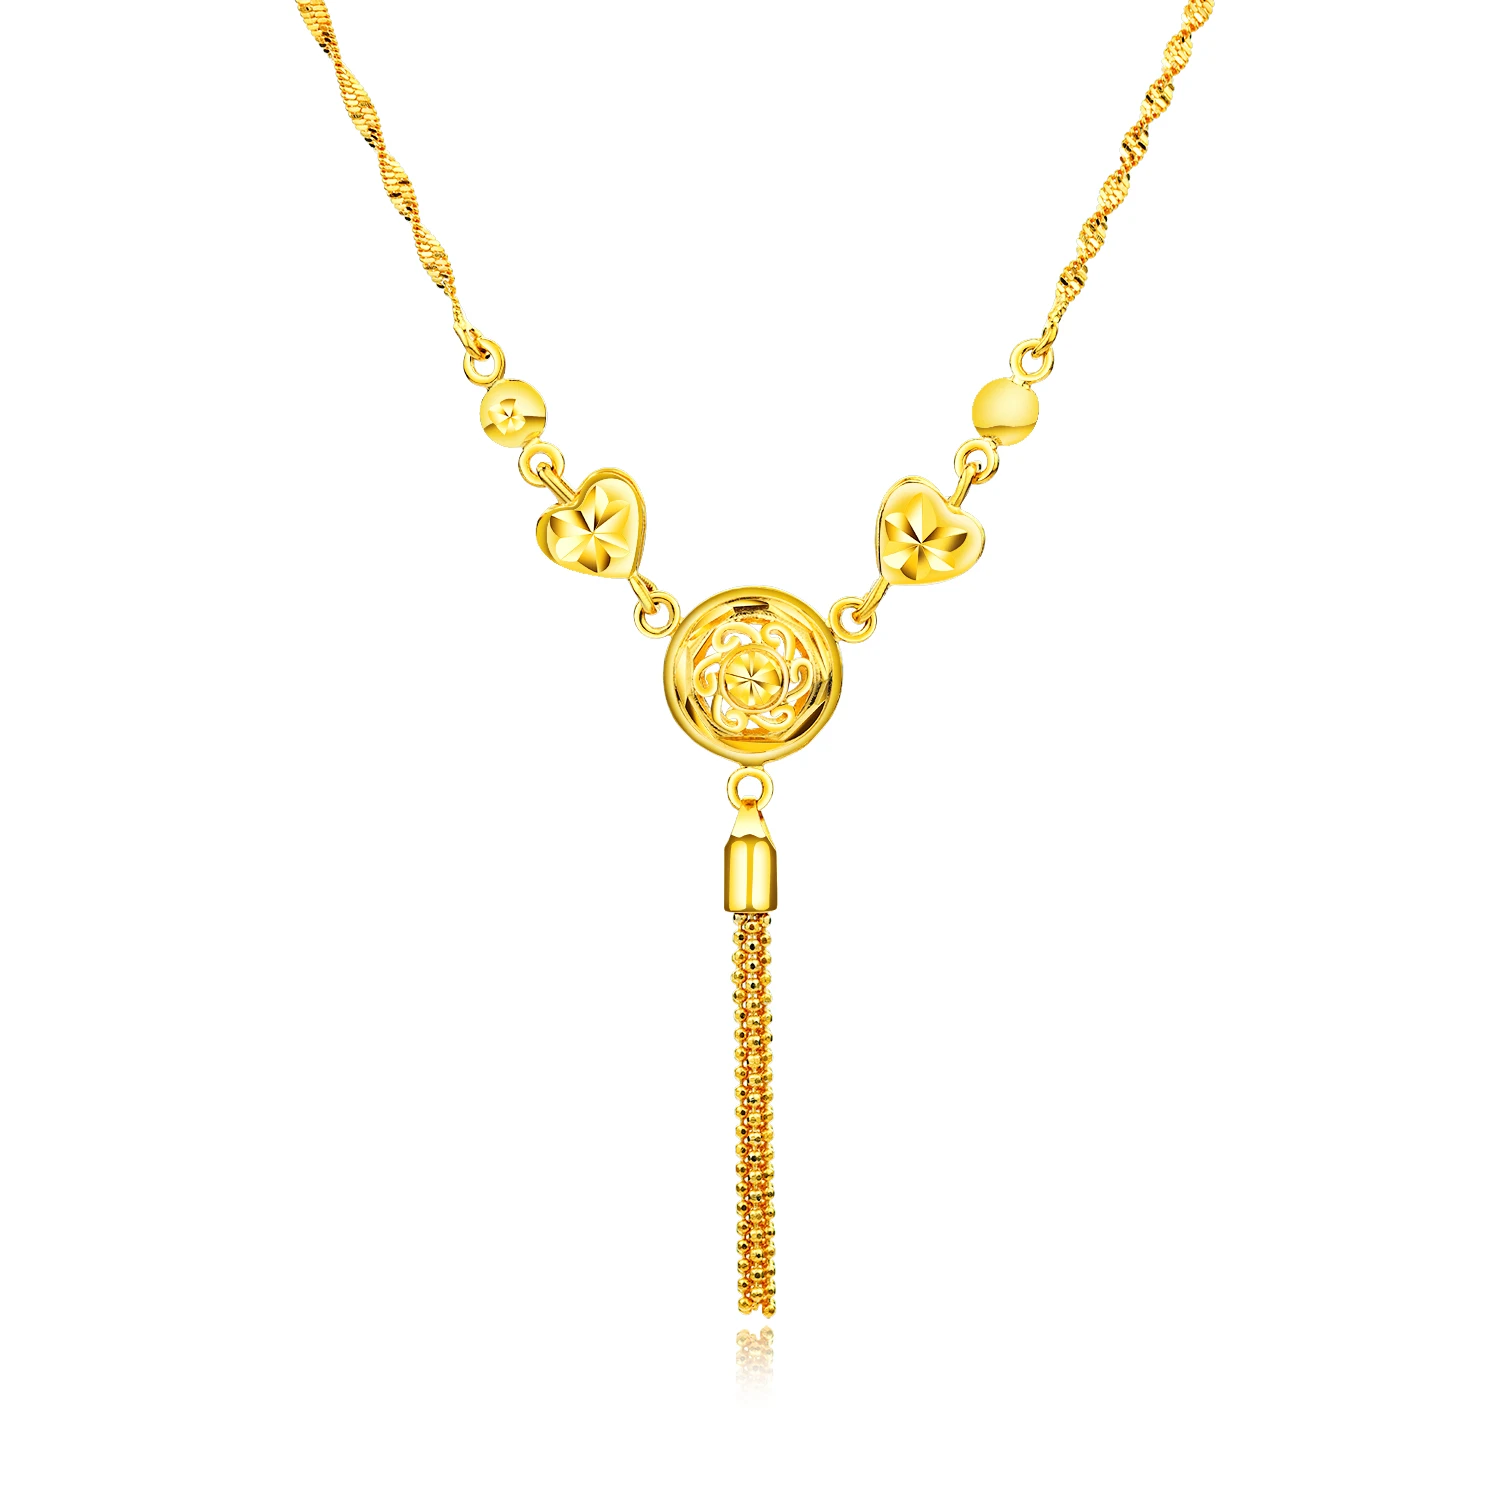 Buy 10 To 15 Gram Gold Necklace Designs 